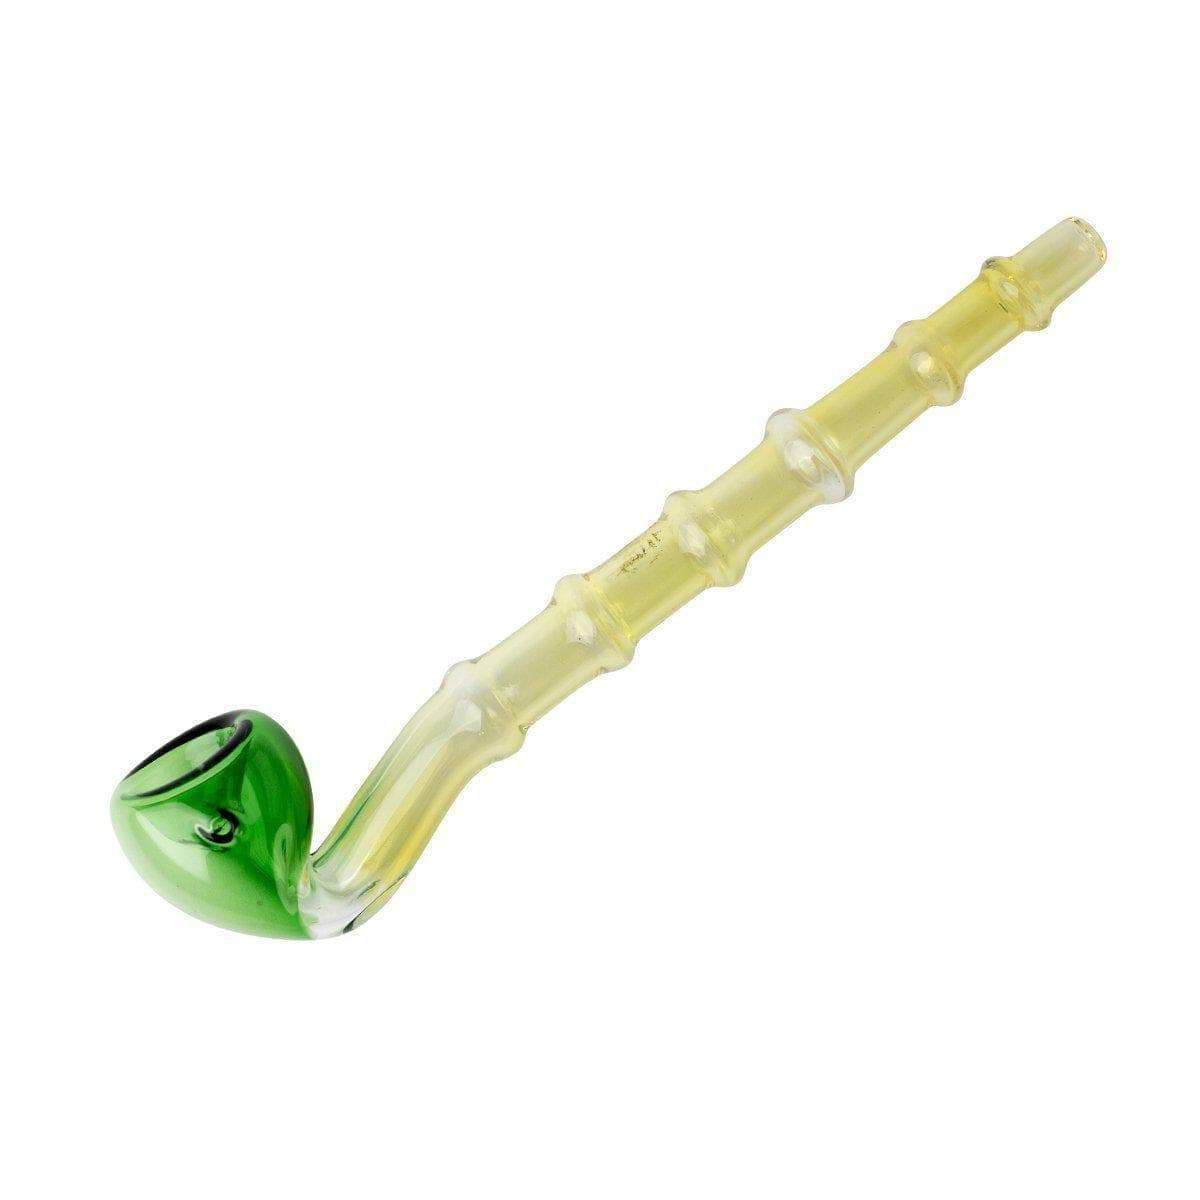 8-inch long curved glass pipe smoking device with ridges easy grip yellow green cane golf club shape Hobbit-inspired design